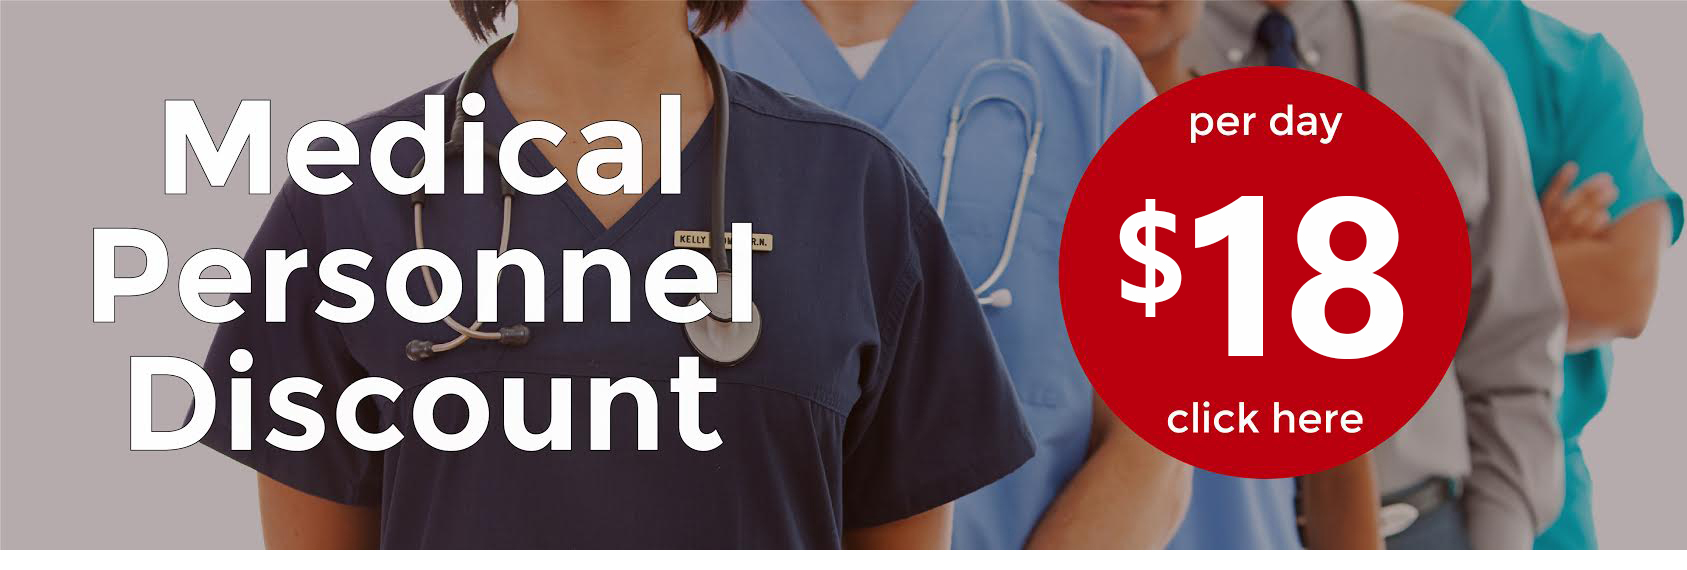 Medical Student Discount